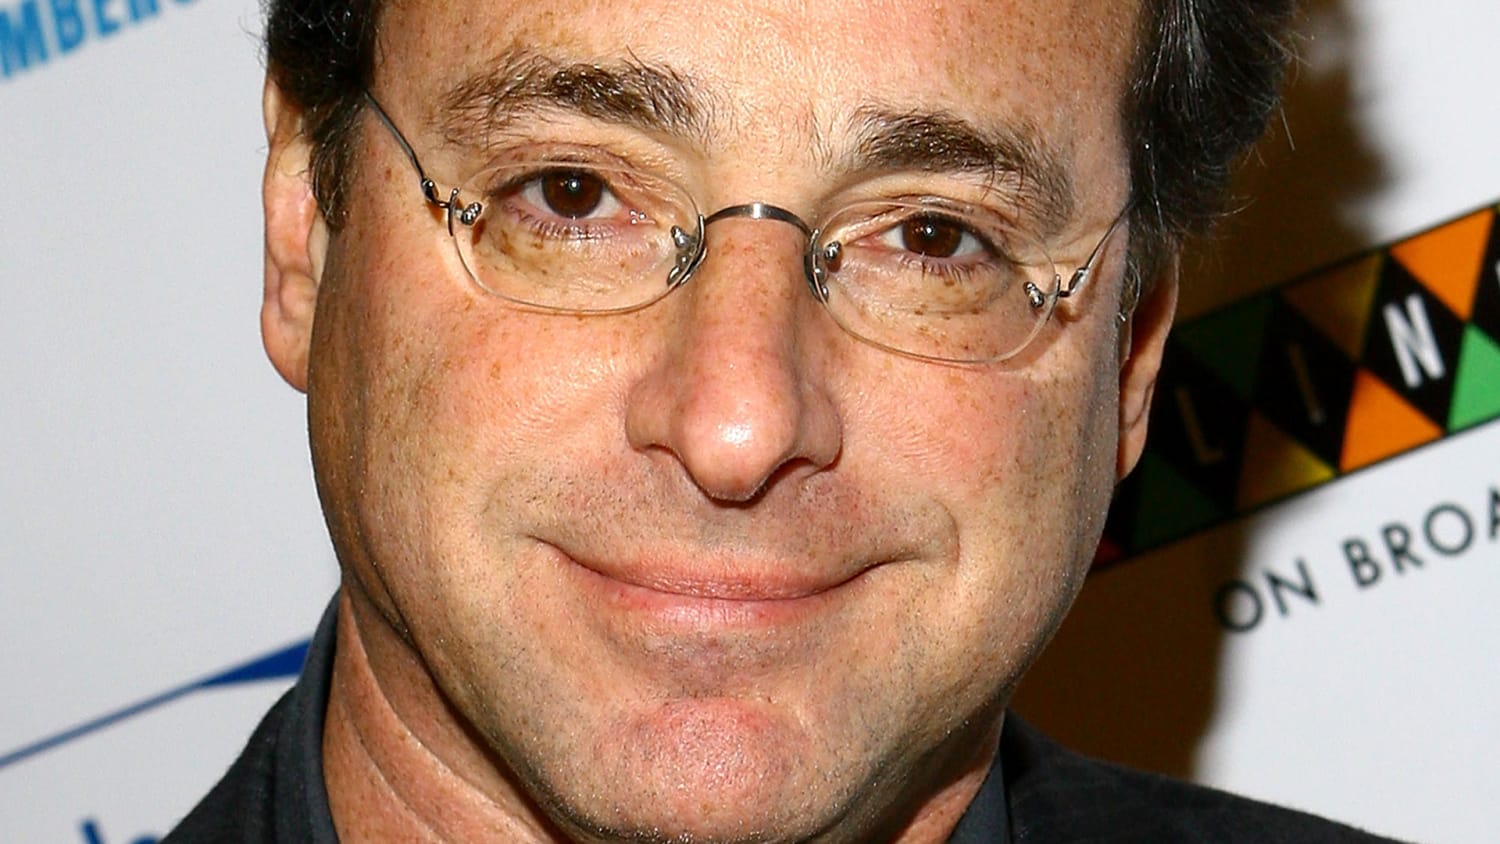 Bob Saget points out his resemblance to this company's logo